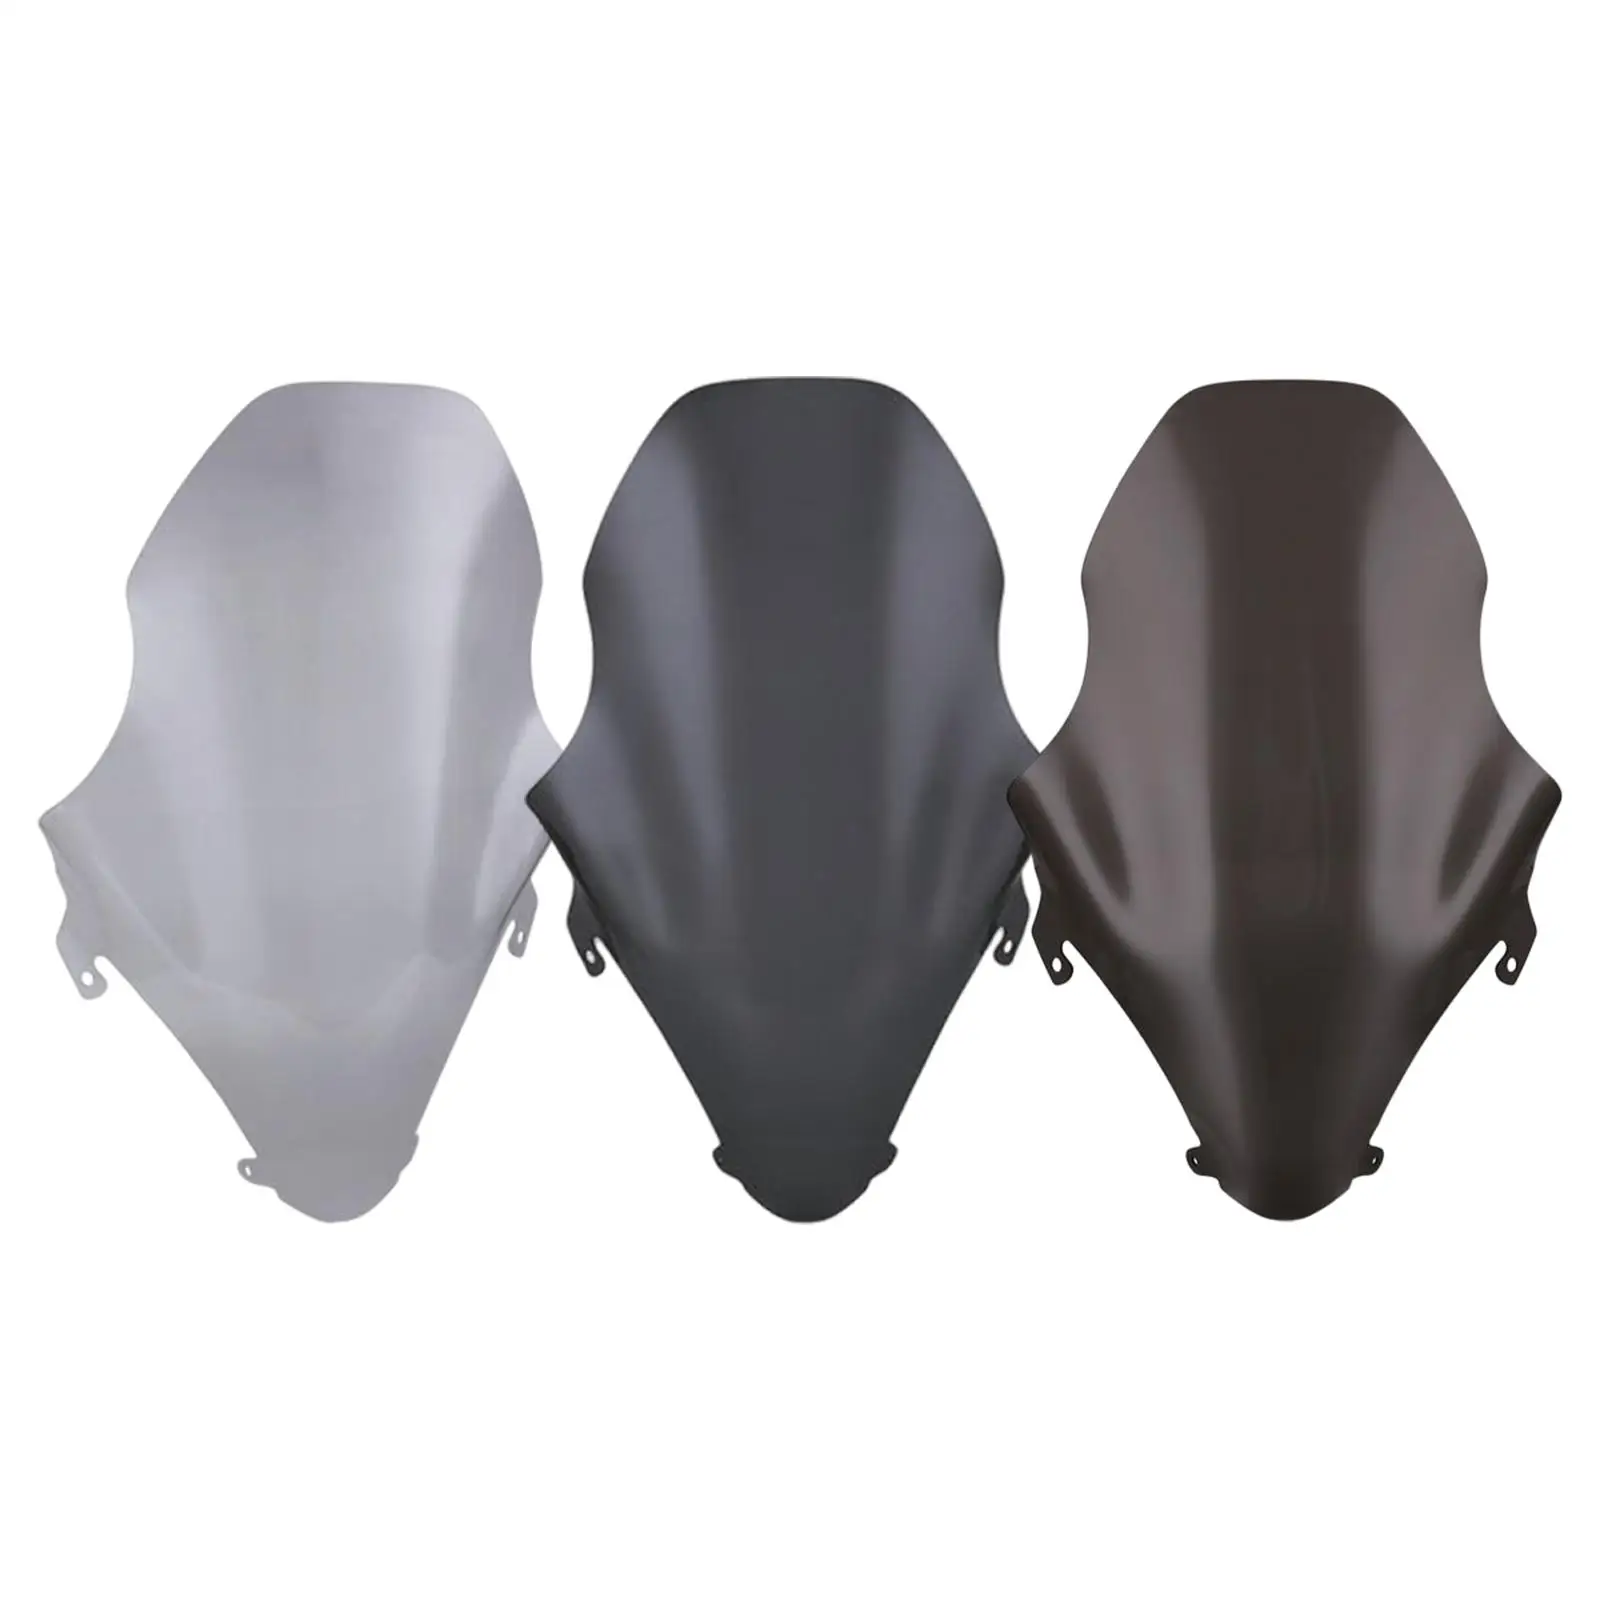 

Windshield Covers Motor Parts Anti Scratch Screen Wind Deflector for Honda Pcx125 150 Accessory Replaces Premium Durable